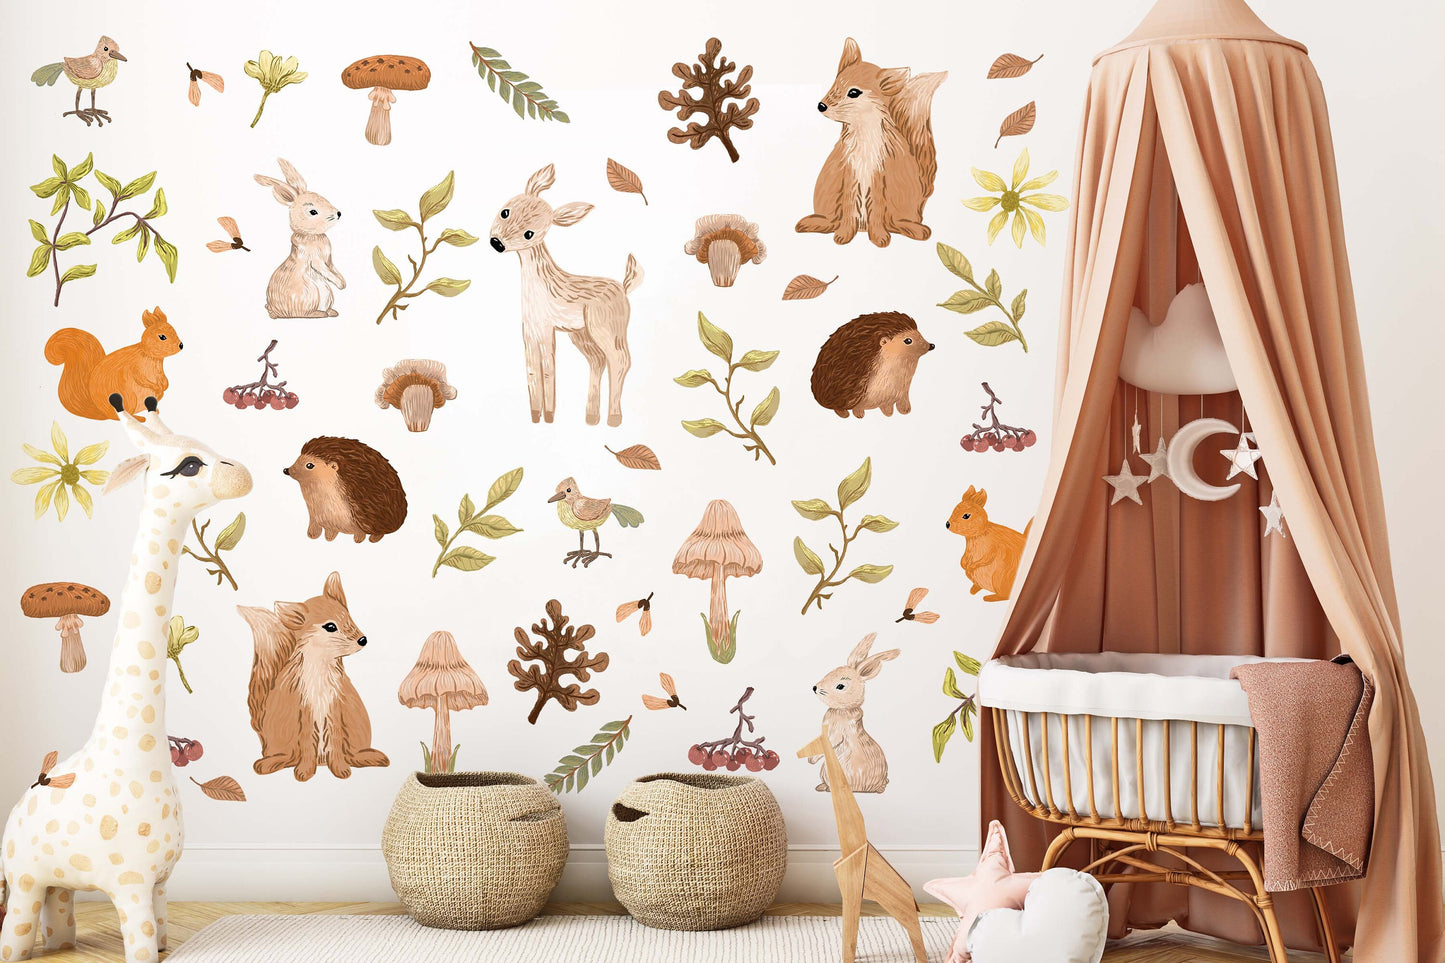 Forest Animals Nursery Wall Decal Watercolor Woodland Stickers Leaves Seeds, LF407